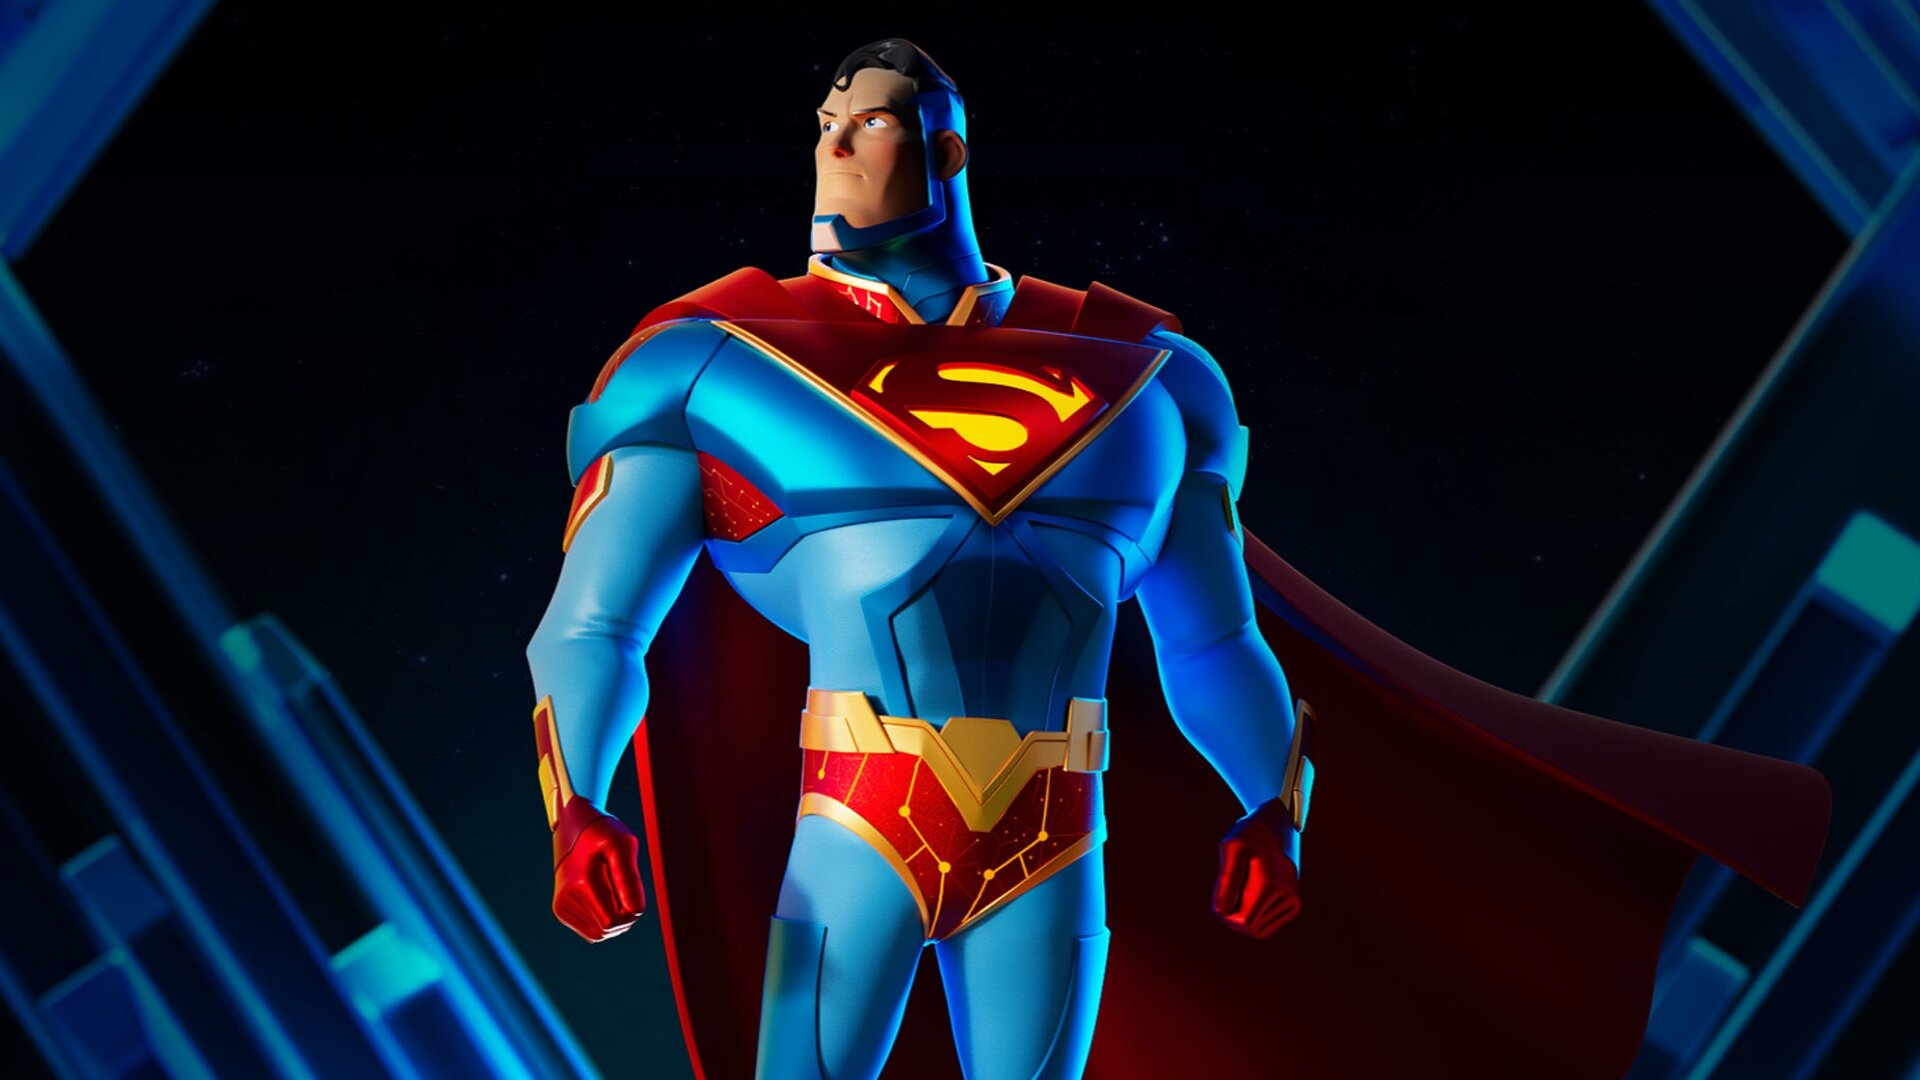 Check Out This Cool Pixar-Style Superman Fan Art — GeekTyrant